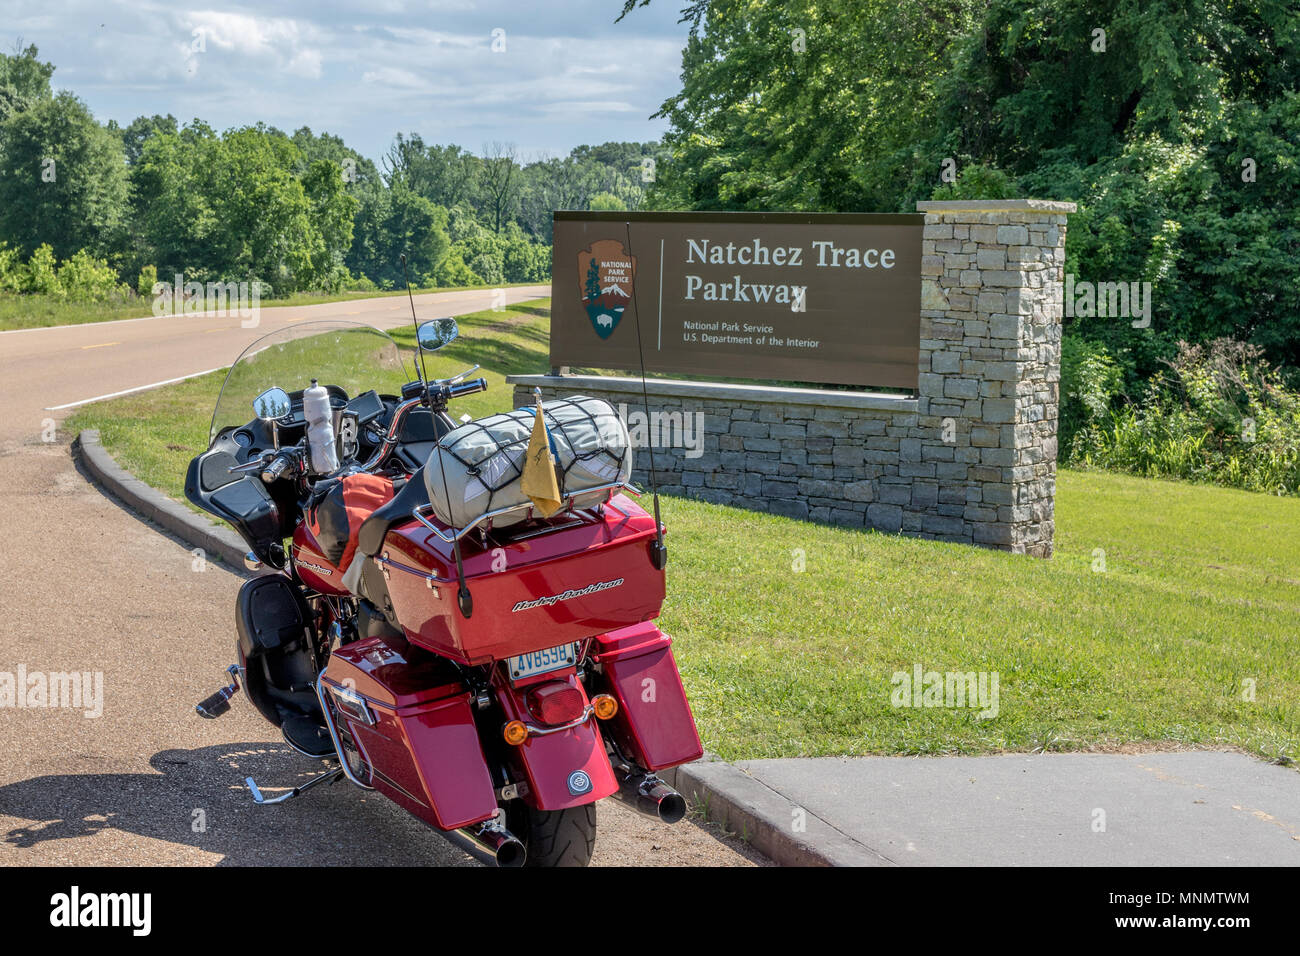 A motorcycle with camping gear strapped on, setting at the southern entrance to the Natchez Trace Parkway, in Mississippi, USA. Stock Photo